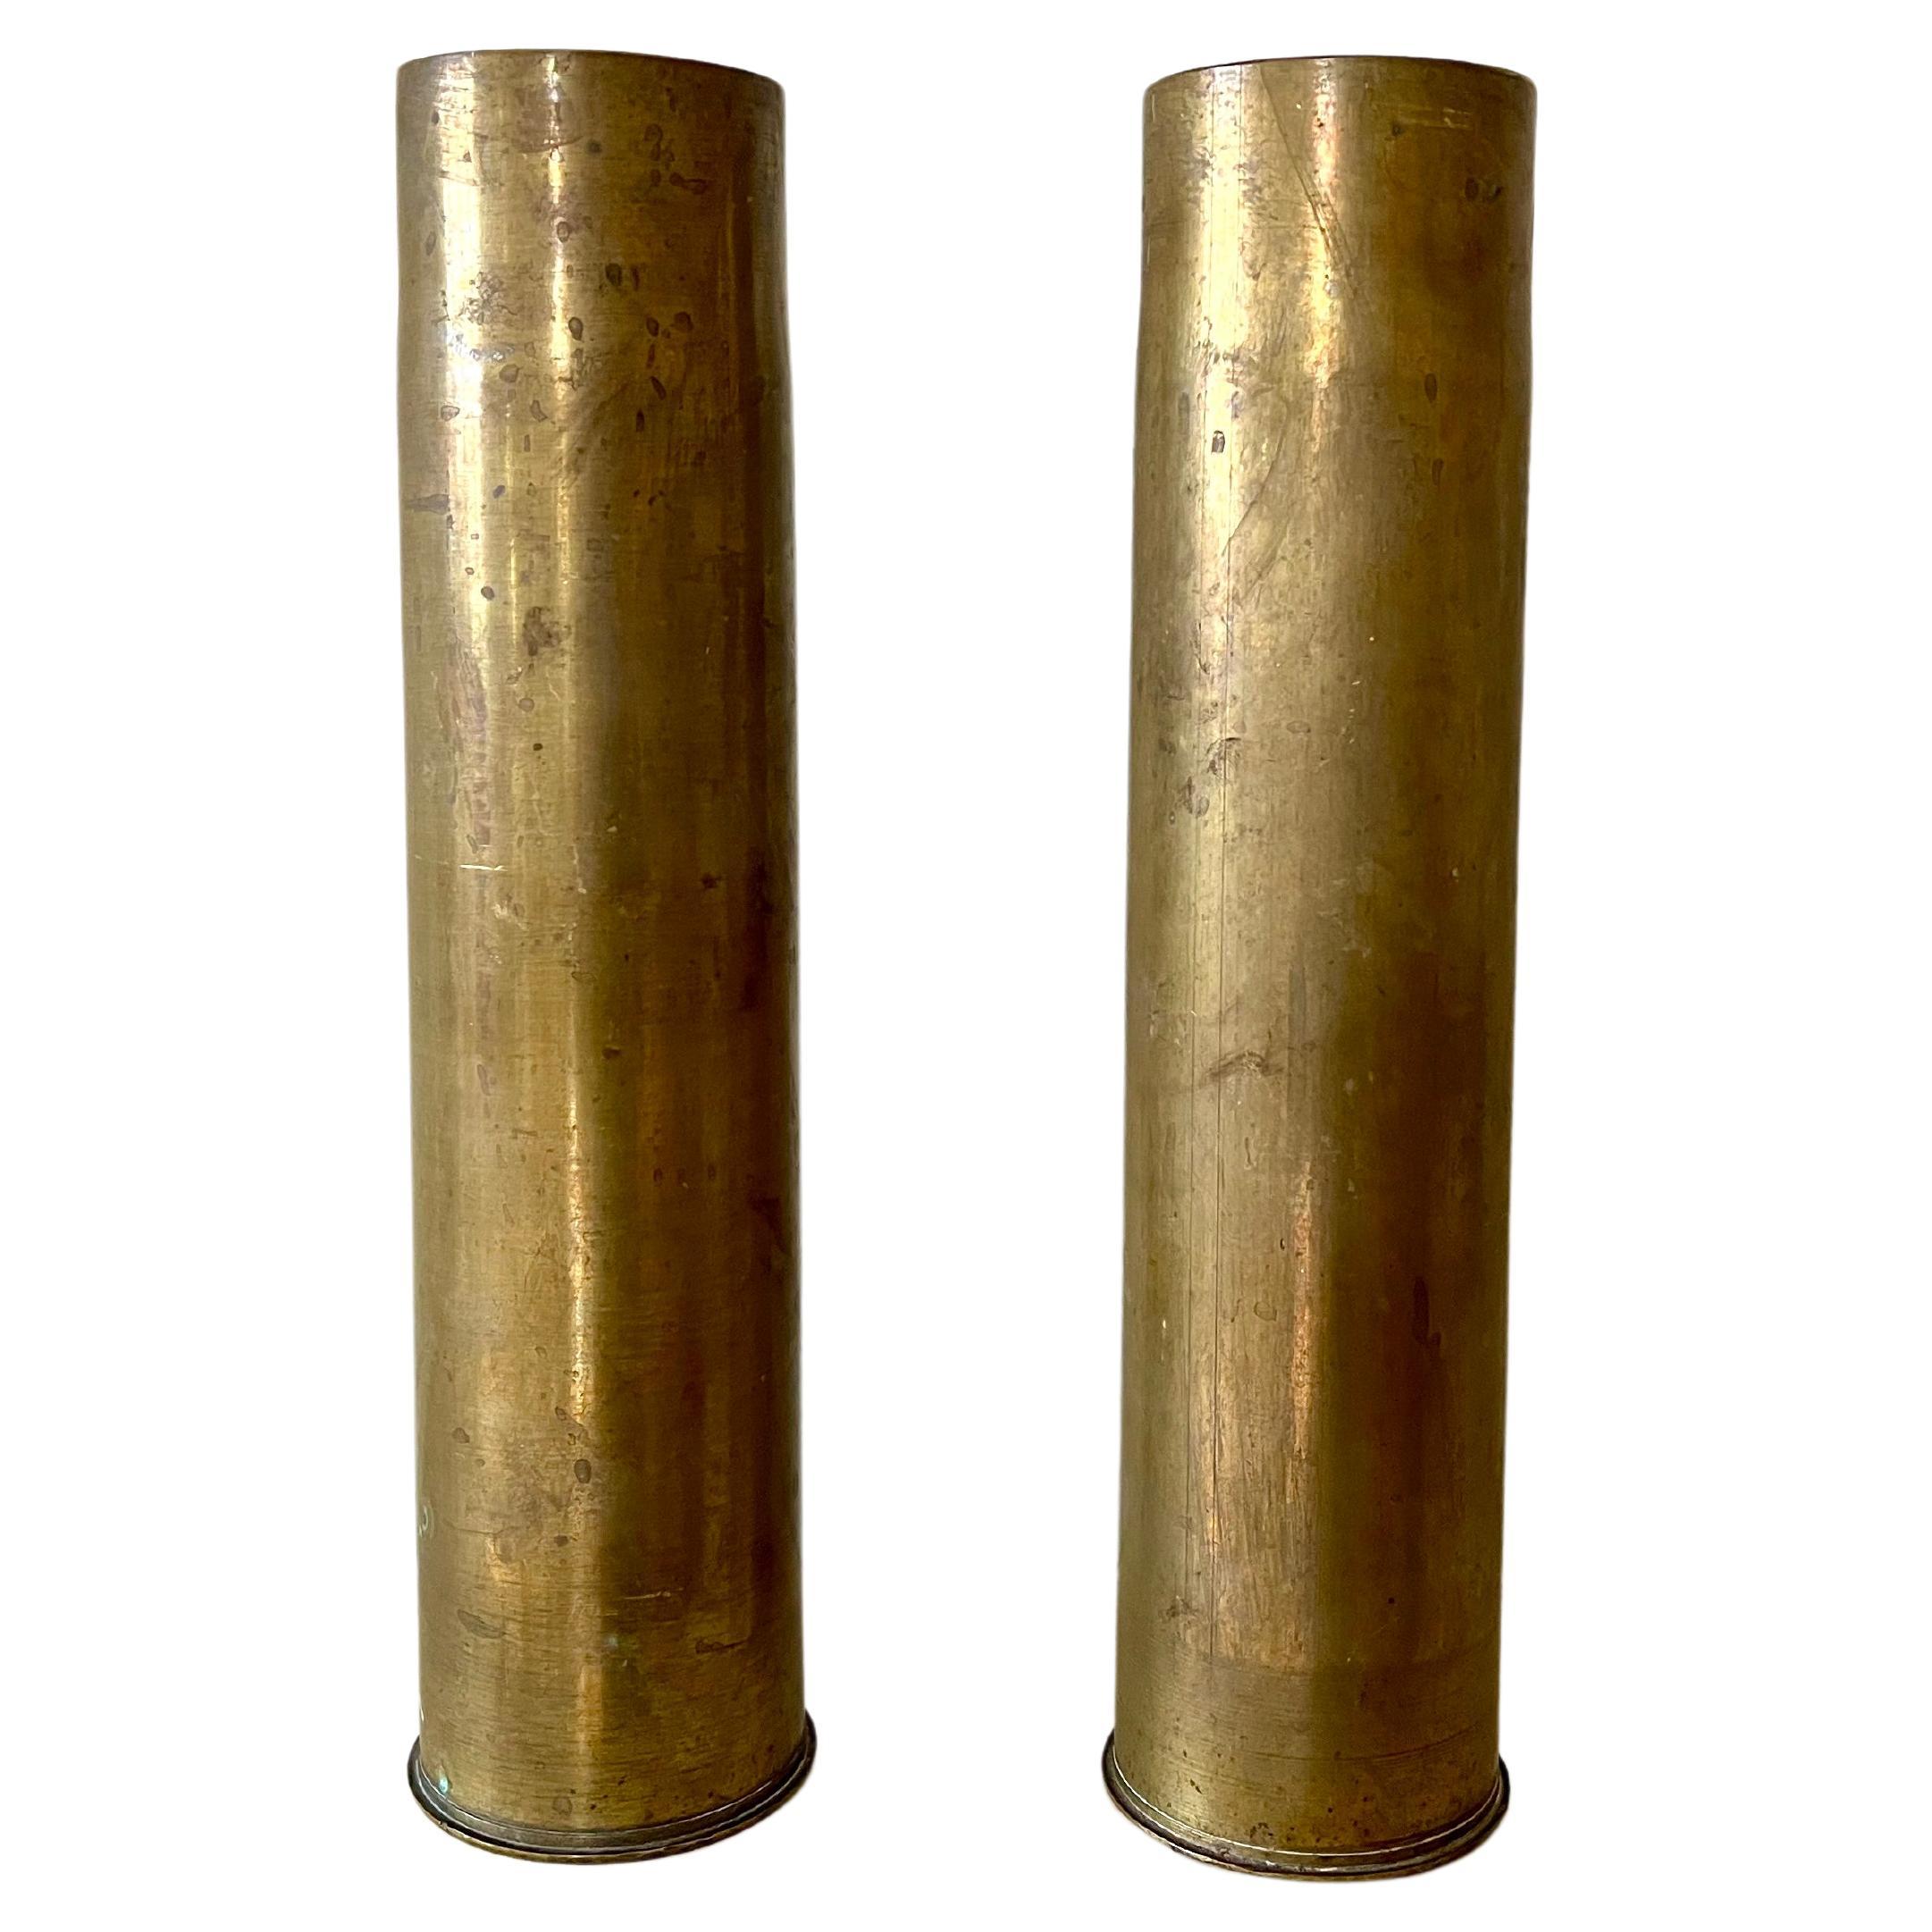 Pair of vintage brass vases from France, early to mid 20th century